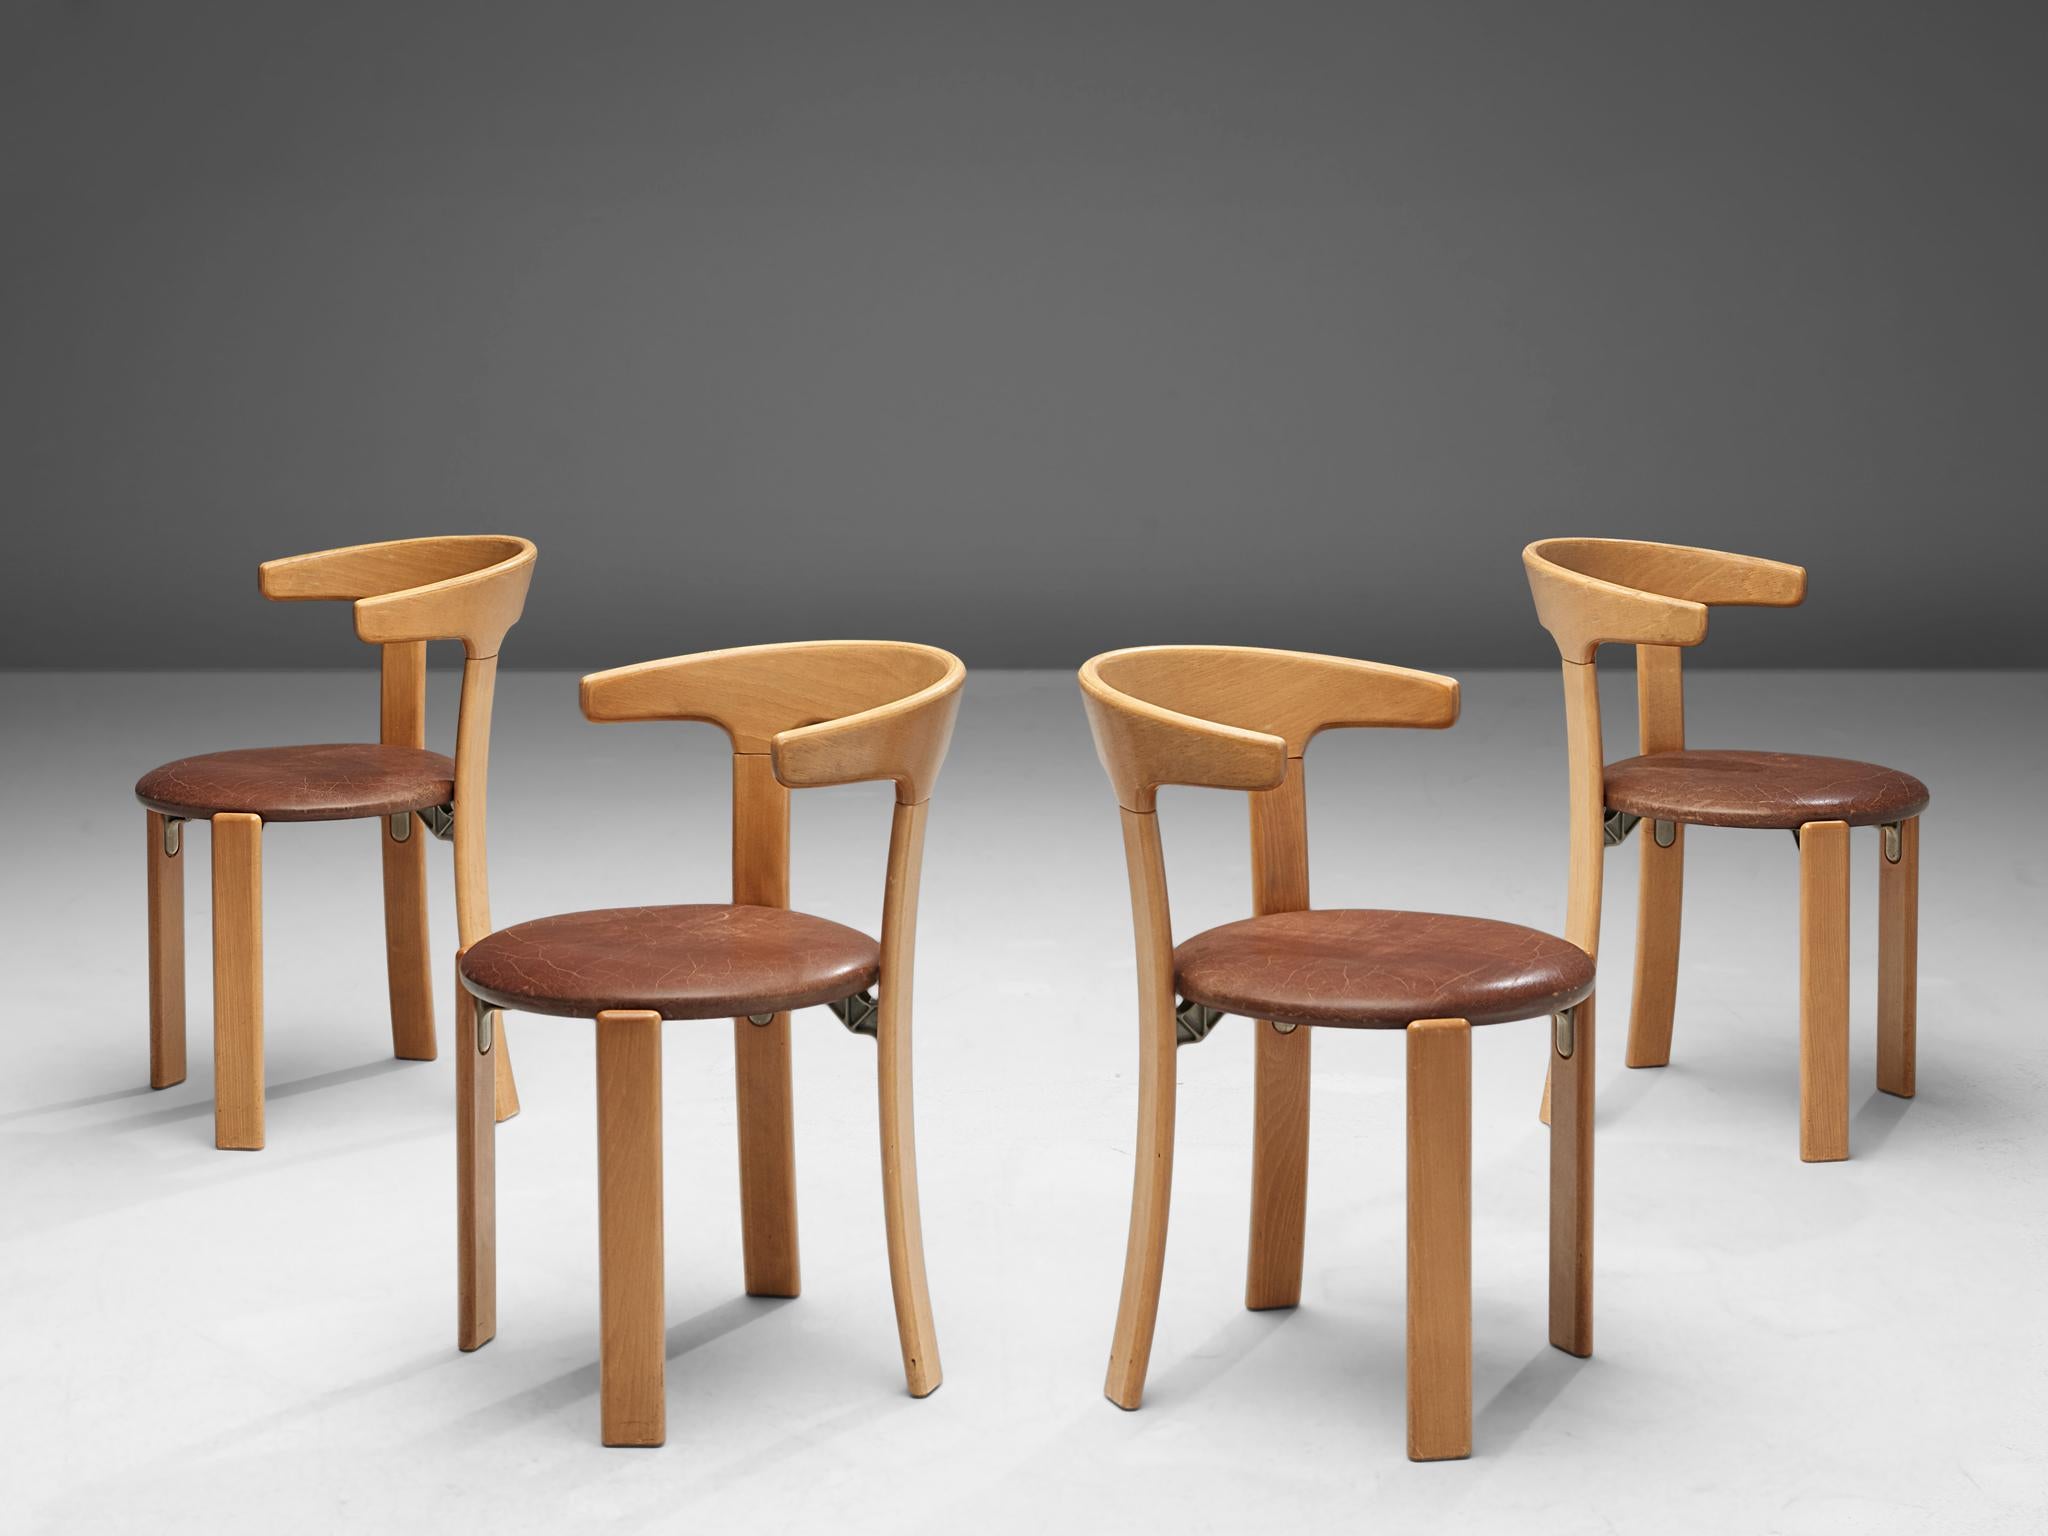 Bruno Rey for Kush & Co, set of five dining chairs, leather and beech, Switzerland, 1971.

This set of dining chairs is designed by Bruno Rey in Switzerland in 1971 and is very comfortable. The chairs are also stackable and were produced in Germany